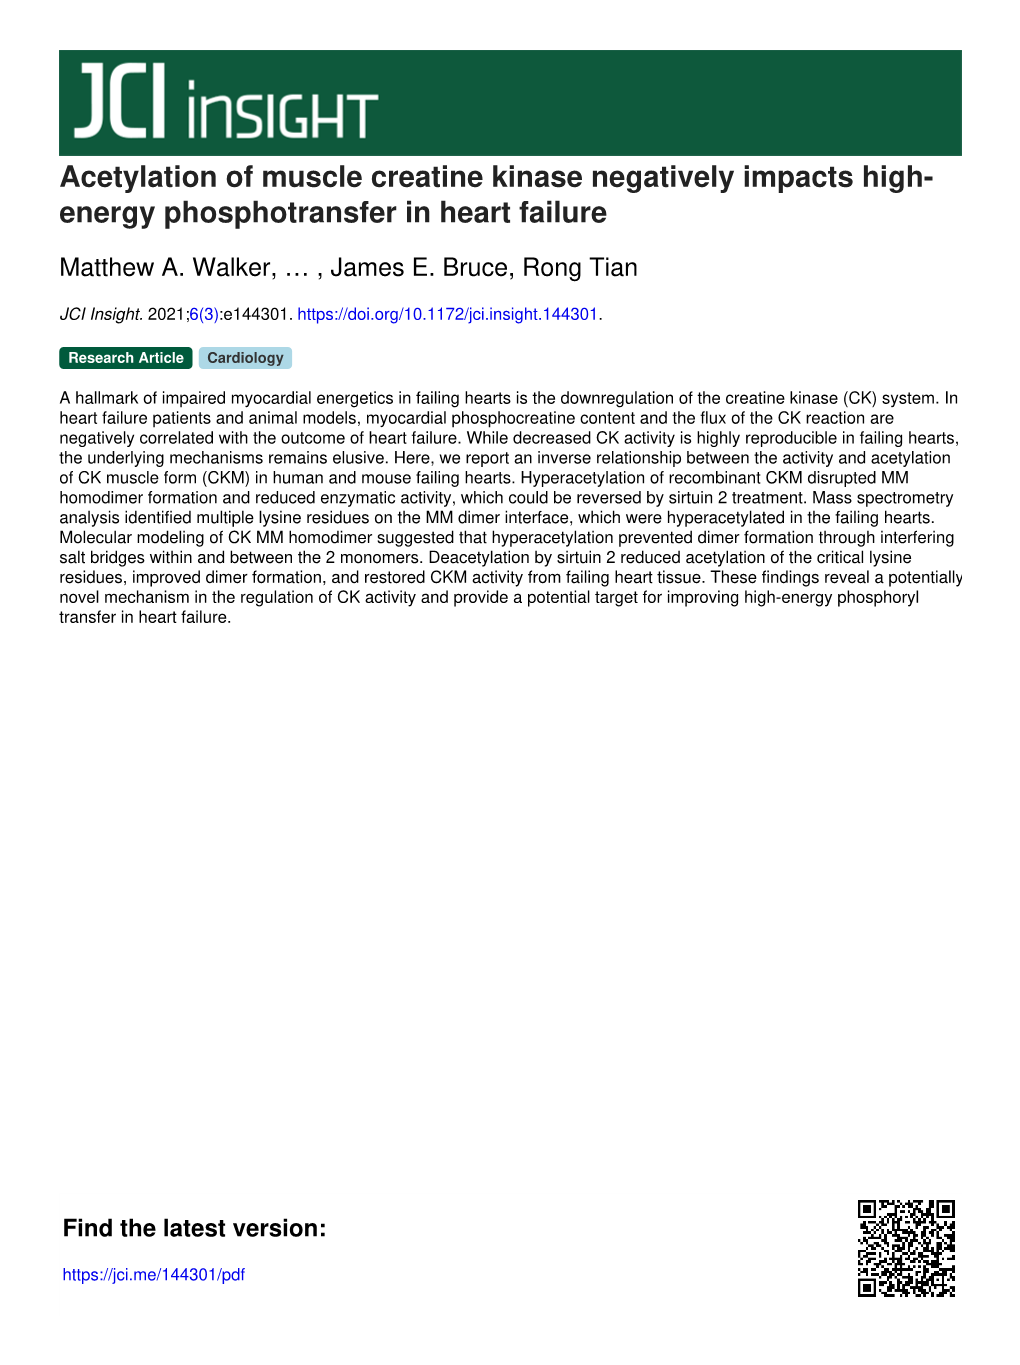 Acetylation of Muscle Creatine Kinase Negatively Impacts High- Energy Phosphotransfer in Heart Failure